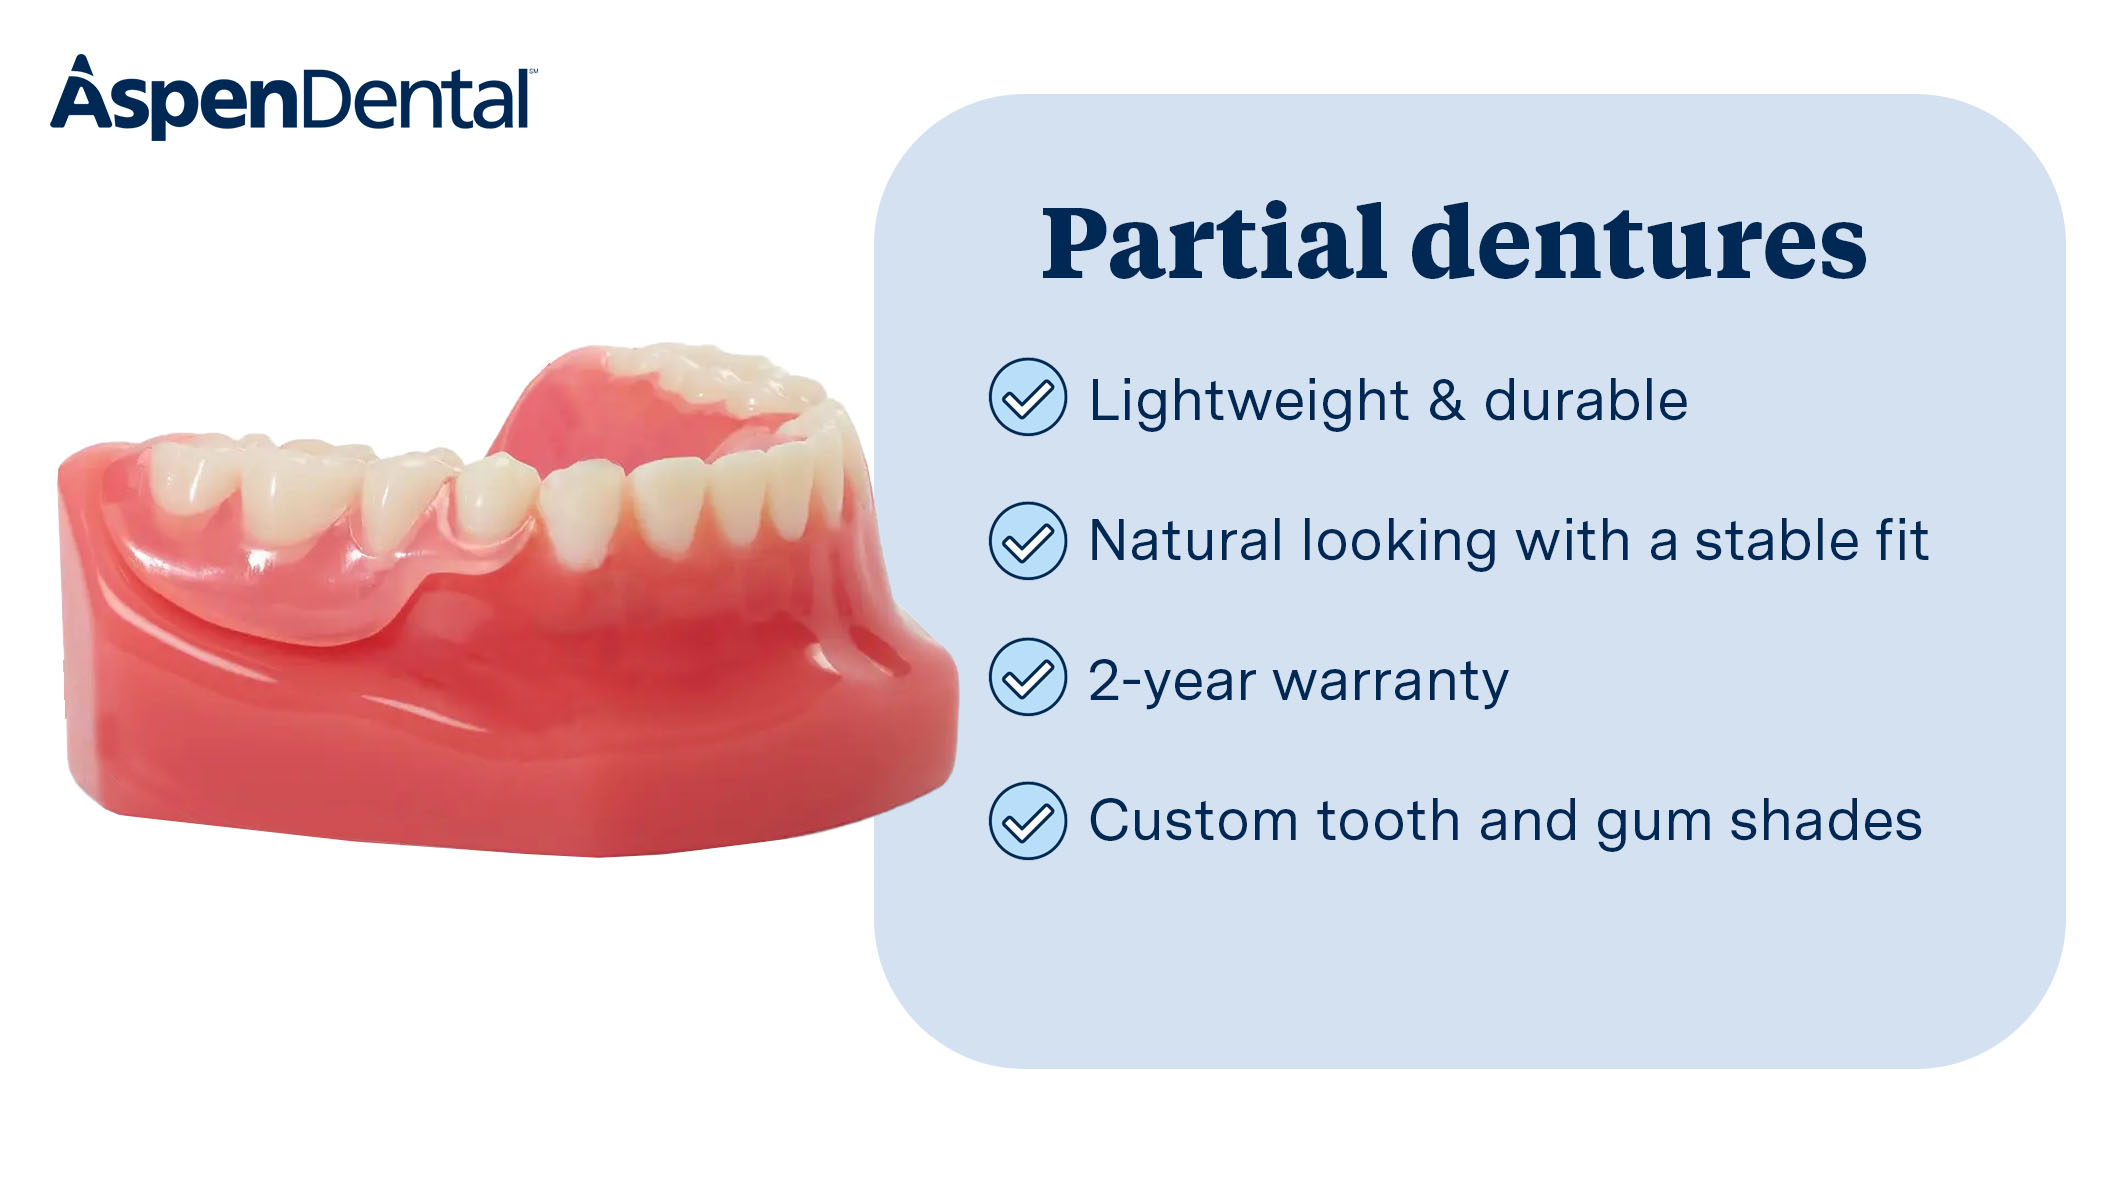 Restore your smile with our customizable partial dentures. Lightweight, durable, natural-looking, an Aspen Dental - Charlottesville, VA Charlottesville (434)422-4051